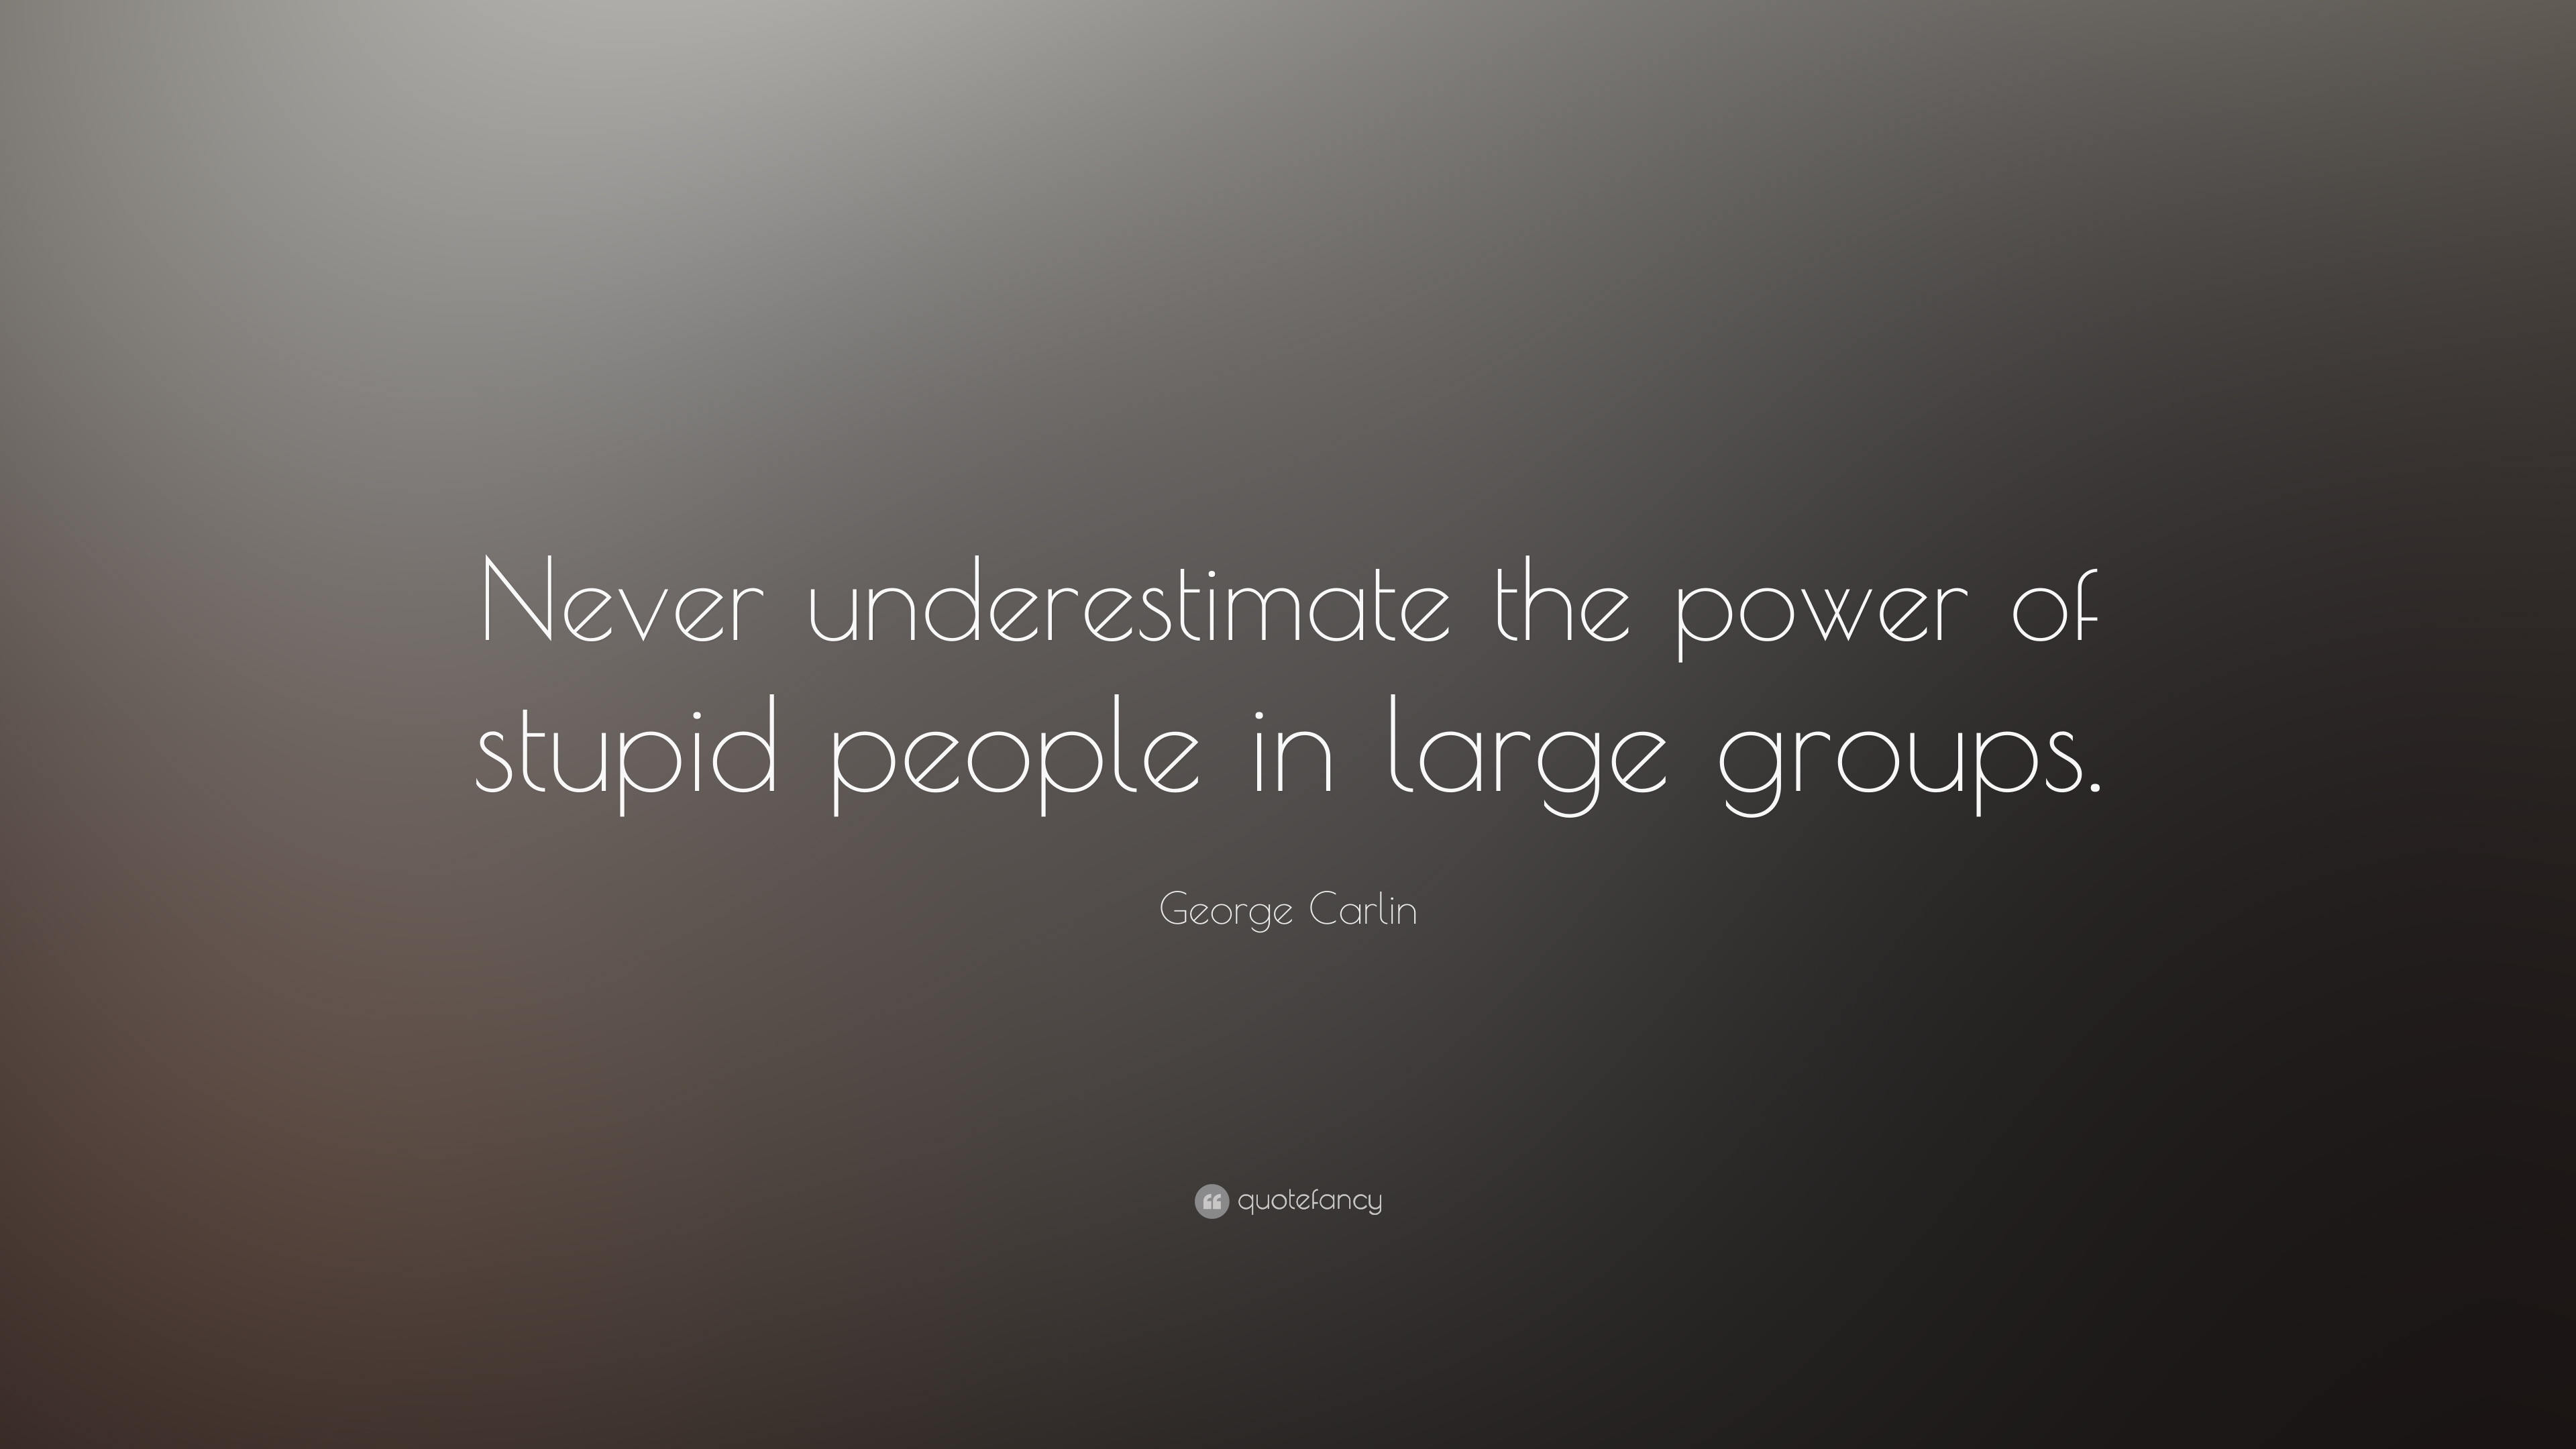 George Carlin Quote: “Never underestimate the power of stupid ...